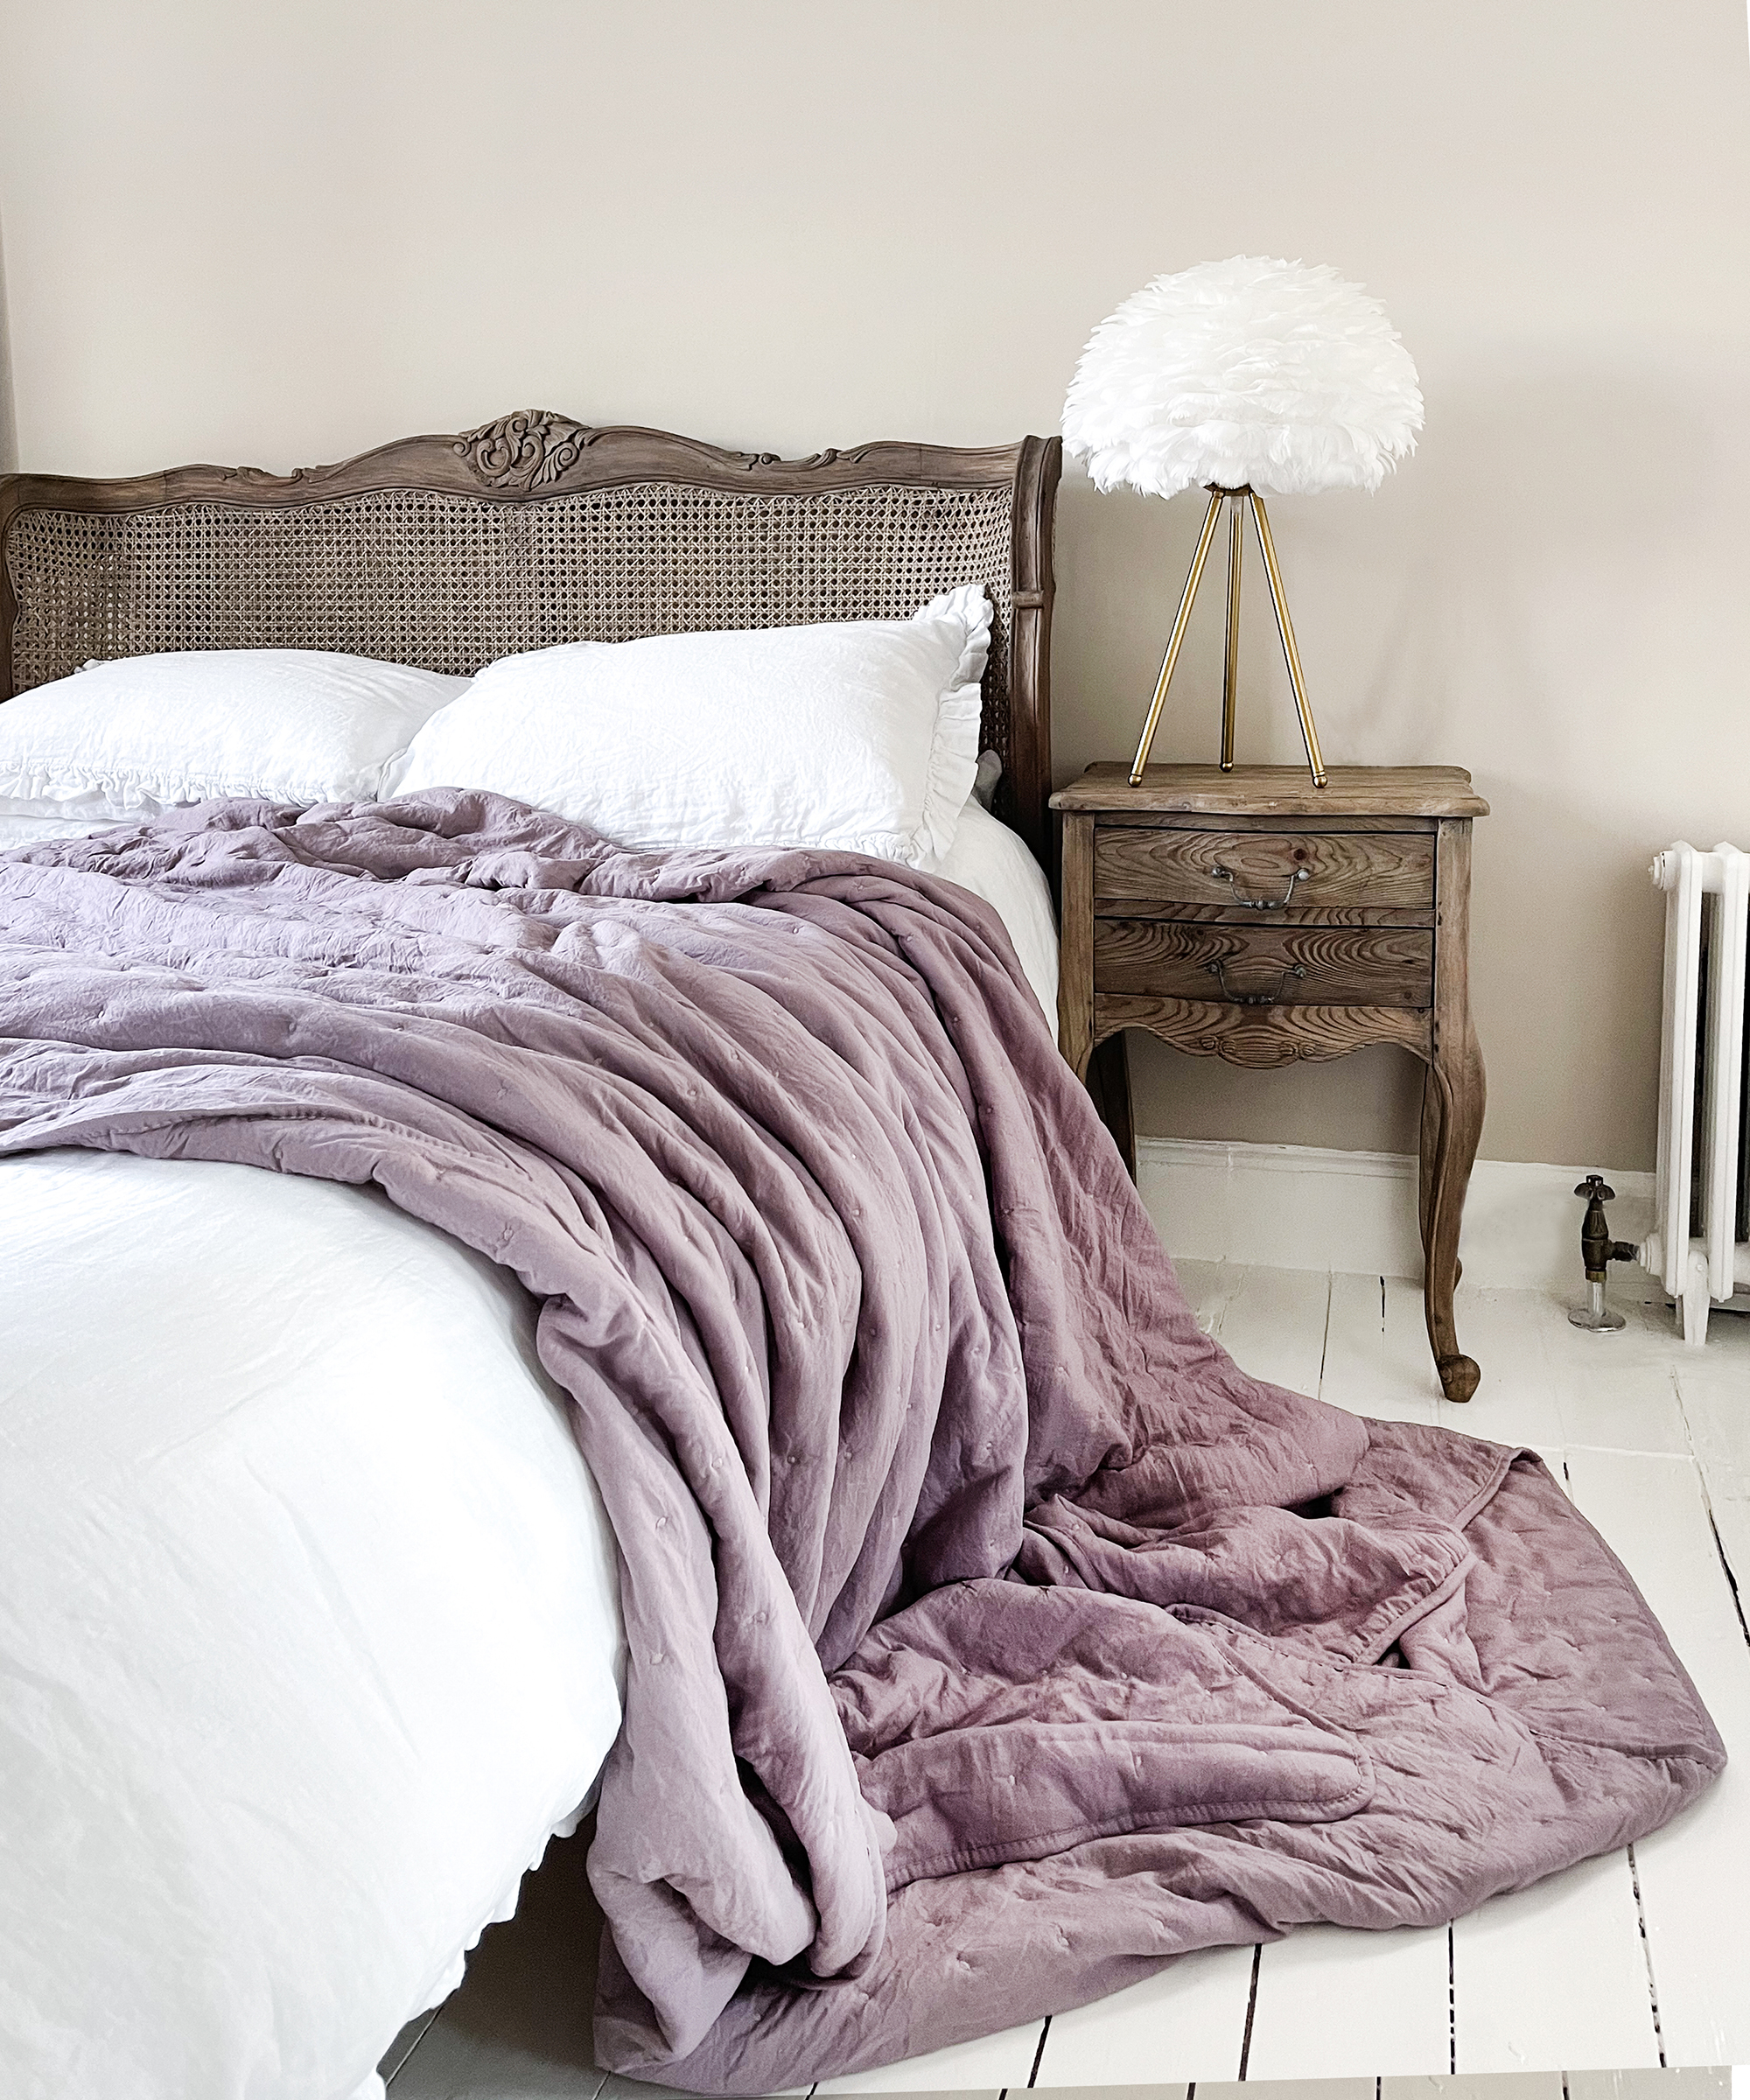 Feathered lampshade by The French Bedroom Co in rustic bedroom scheme with lilac throw